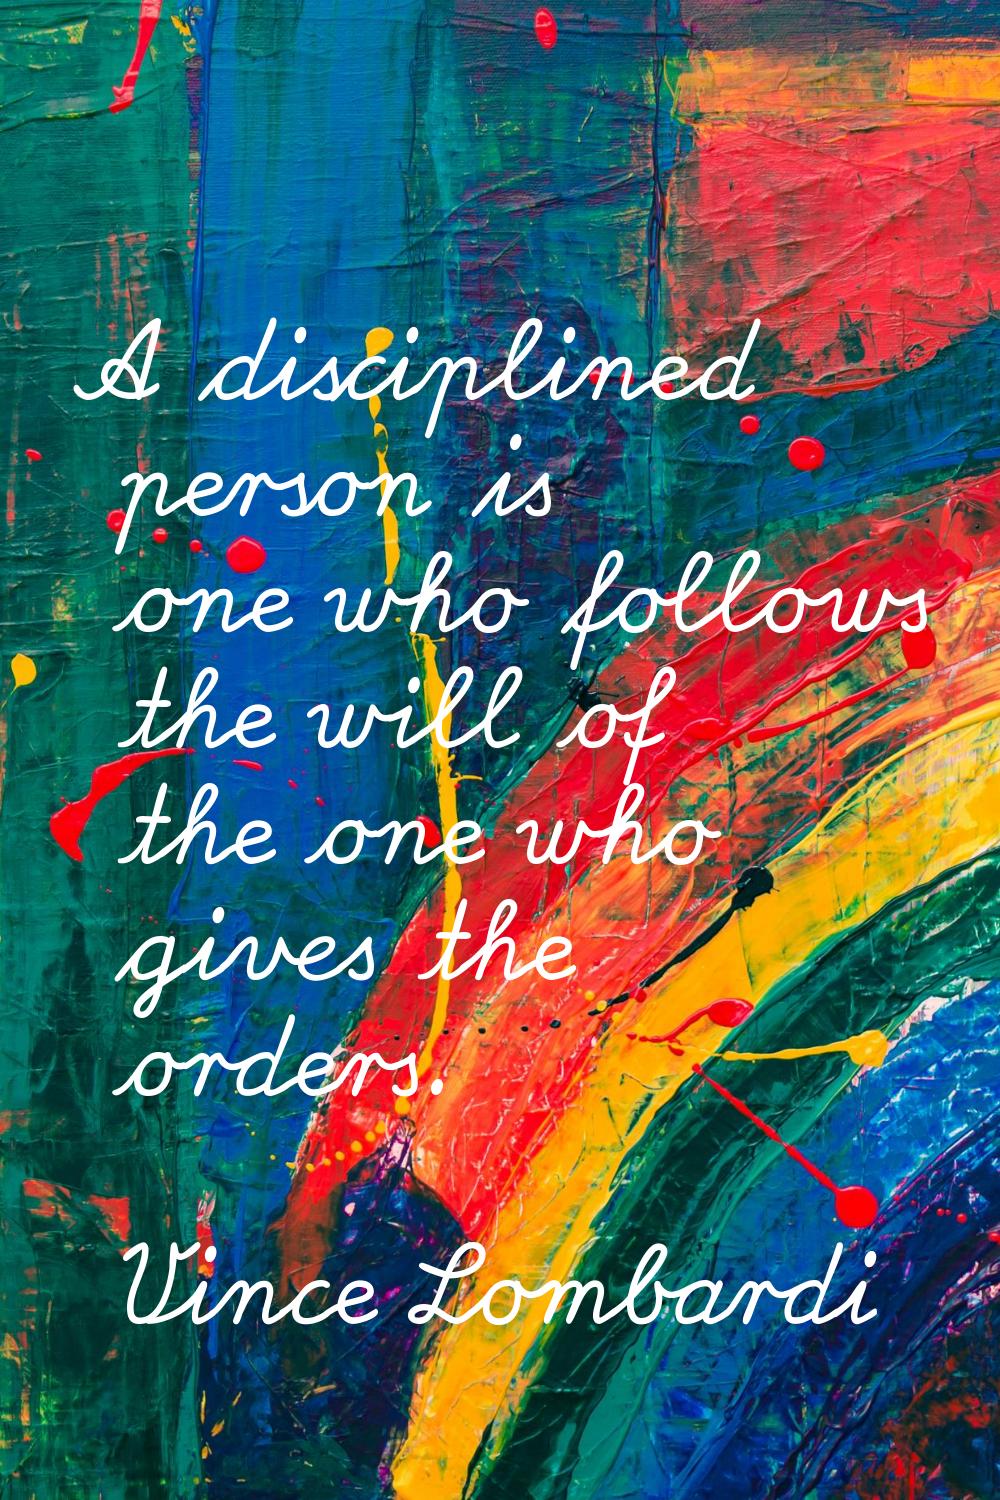 A disciplined person is one who follows the will of the one who gives the orders.